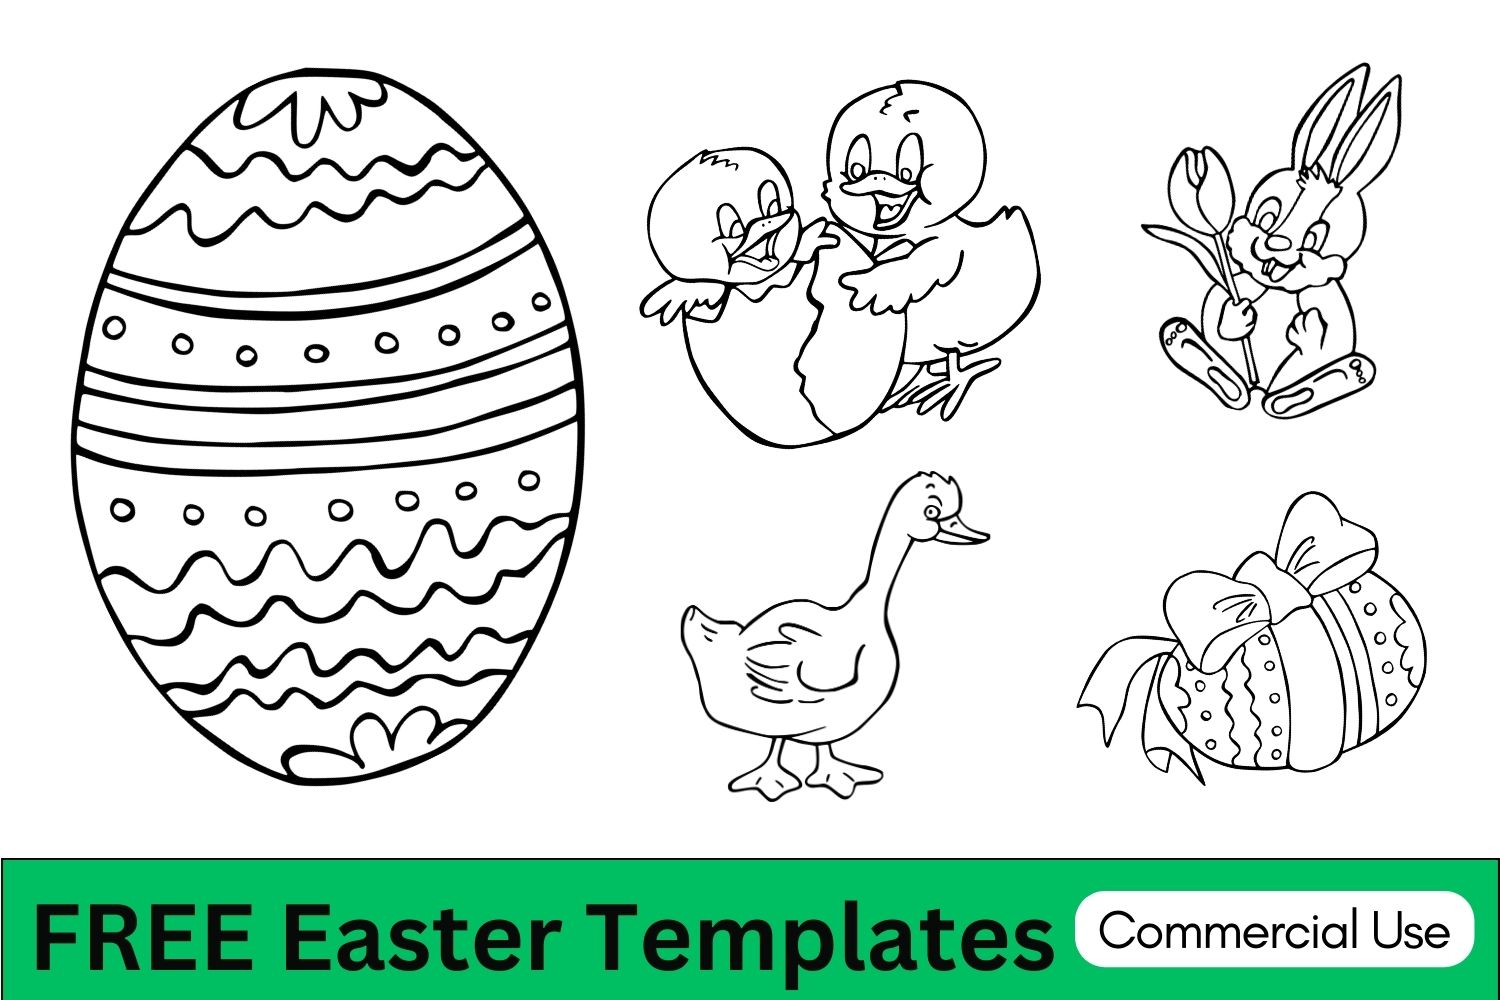 Easter Outlines, easter stencil, printables, coloring sheets, vector, cricut, silhouette, animal, svg, coloring page, quilting pattern, toy, design clipart